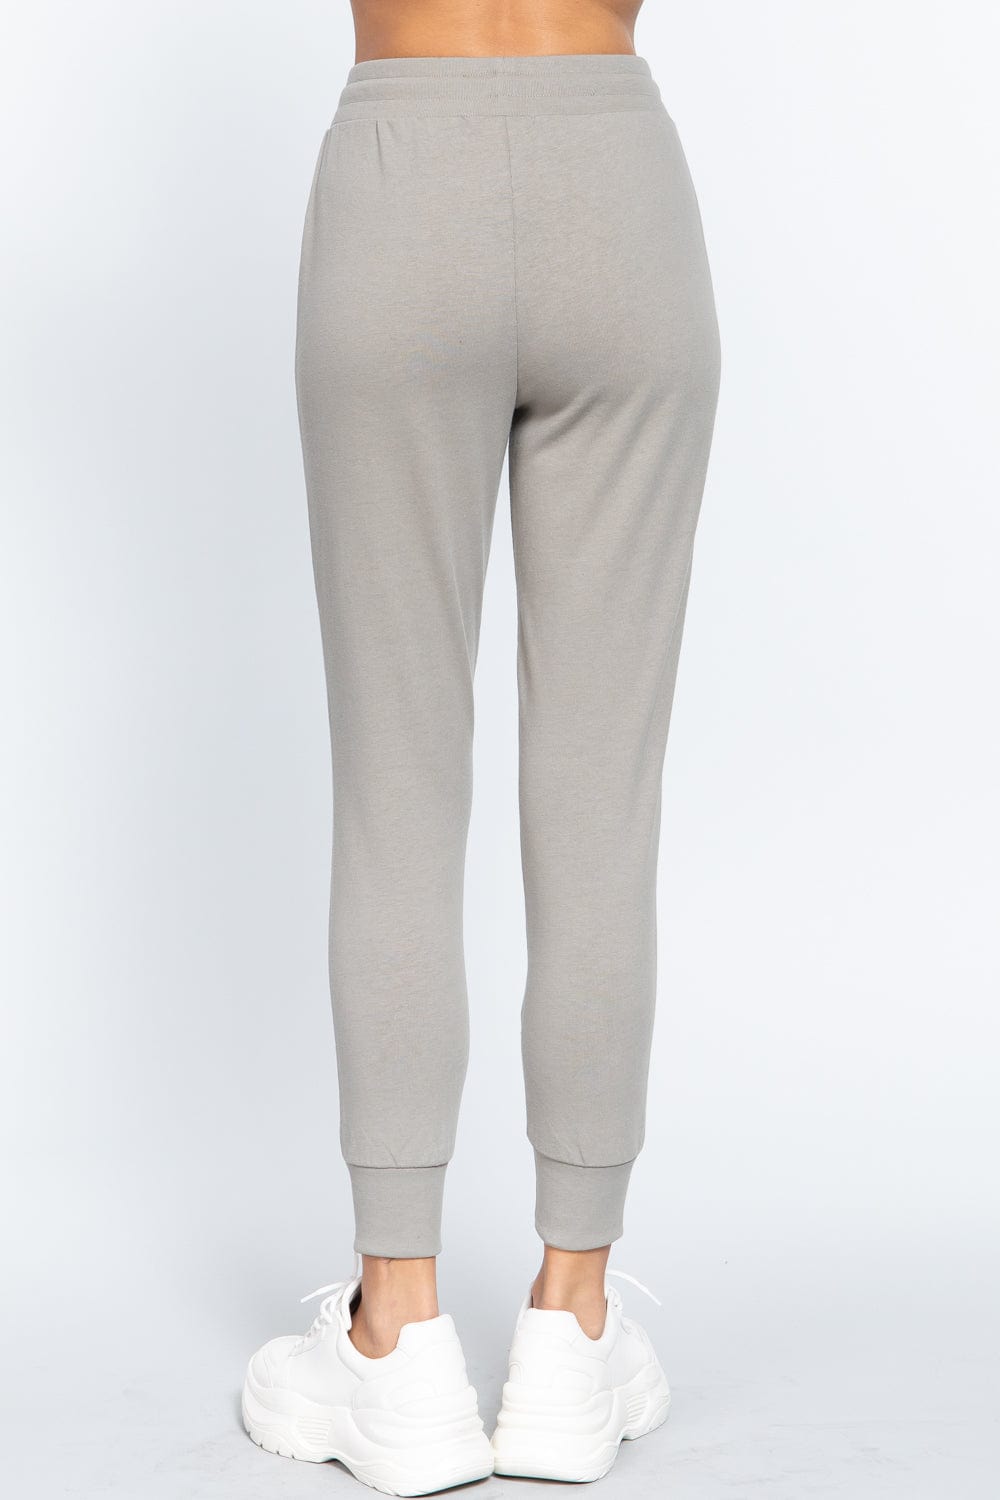 The802Gypsy  bottoms/sweatpants ♥GYPSY LOVE-Waist Band Sweatpants With Pockets